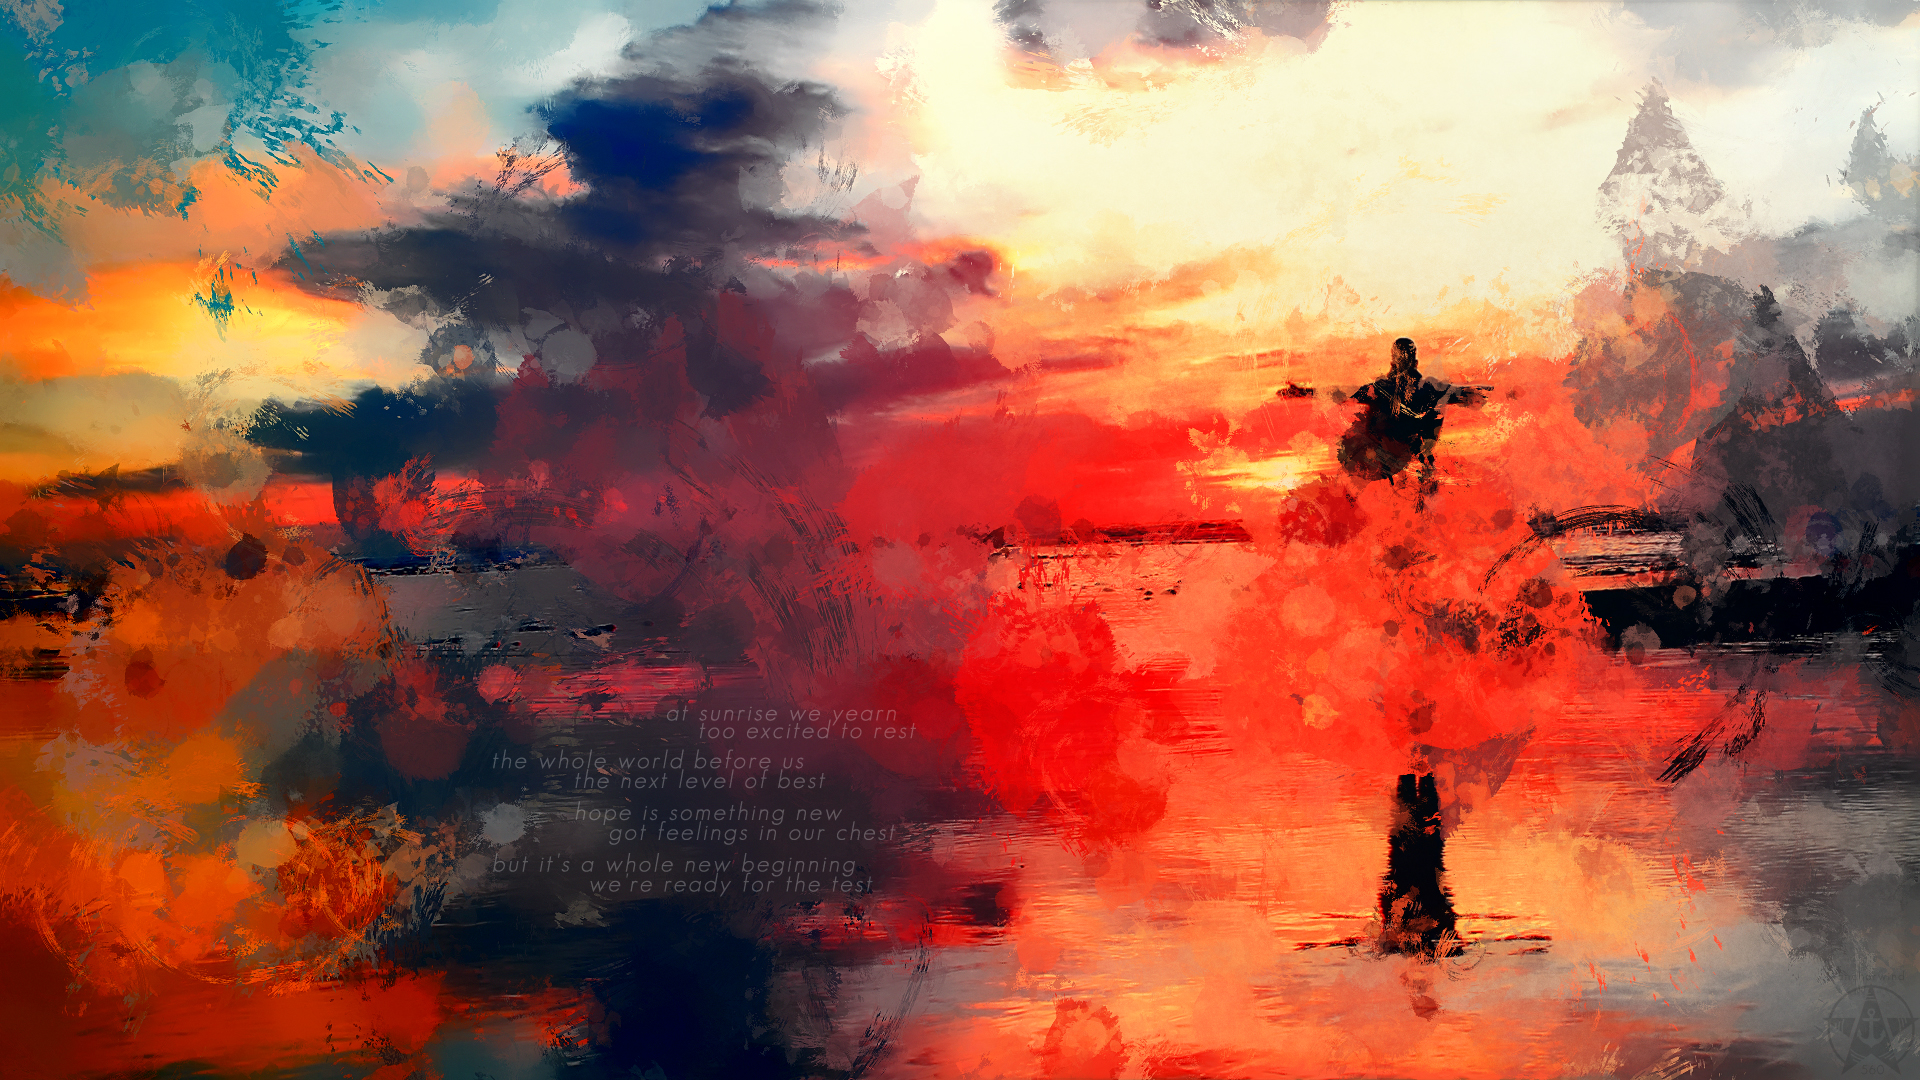 Sunrise:A Digital Art piece by Anchorwind, a disabled OIF/OEF Veteran artist, writer, and audio tinkerer.